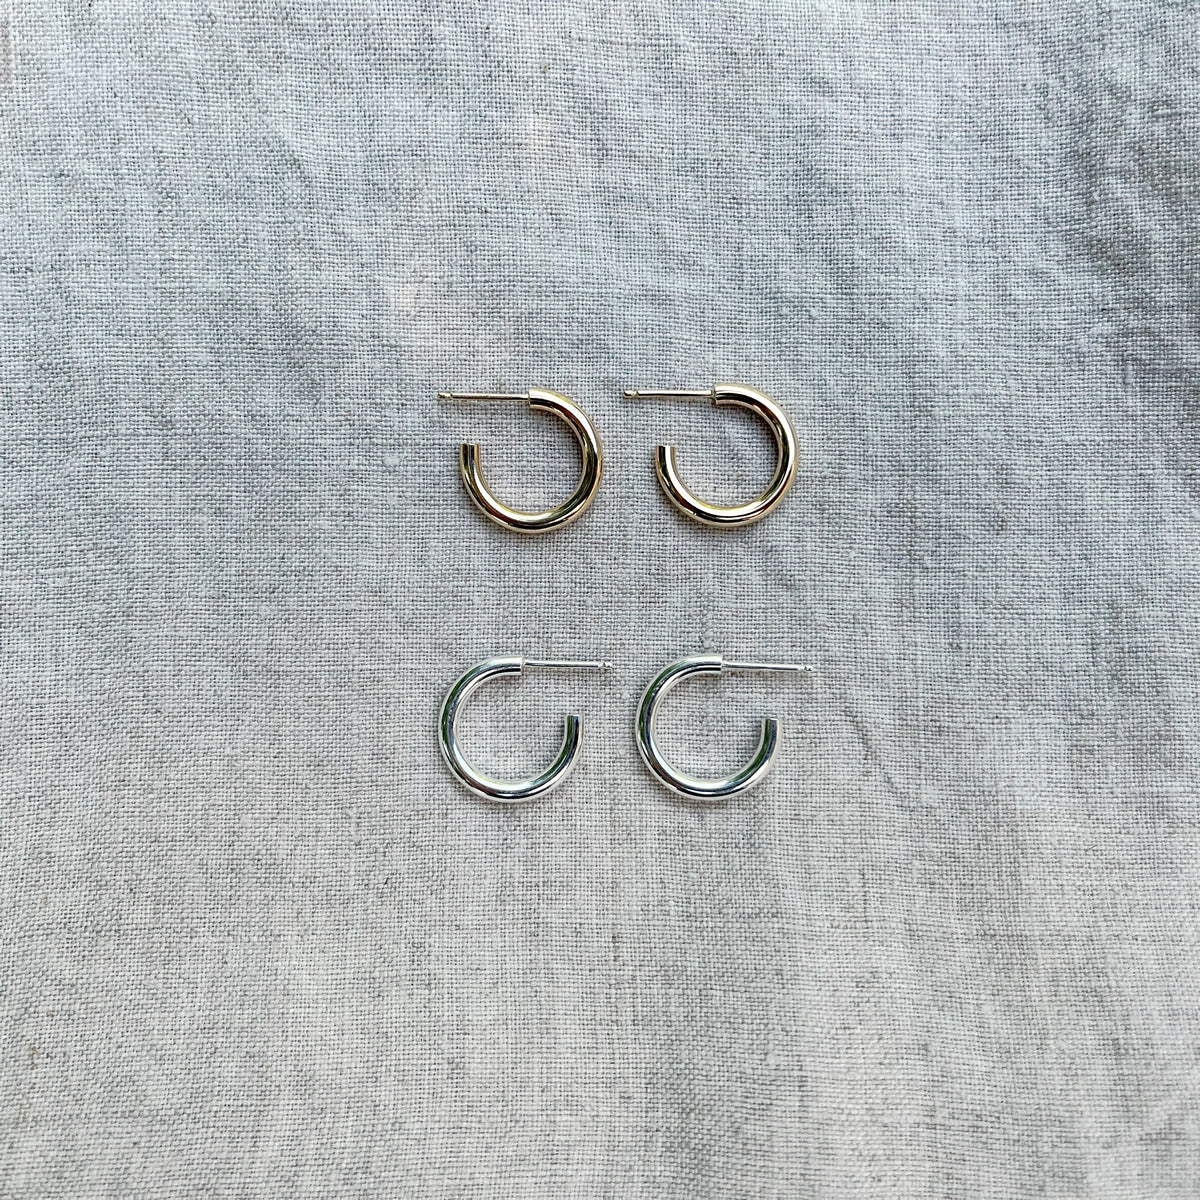 14k gold filled and sterling silver hoops on linen cloth